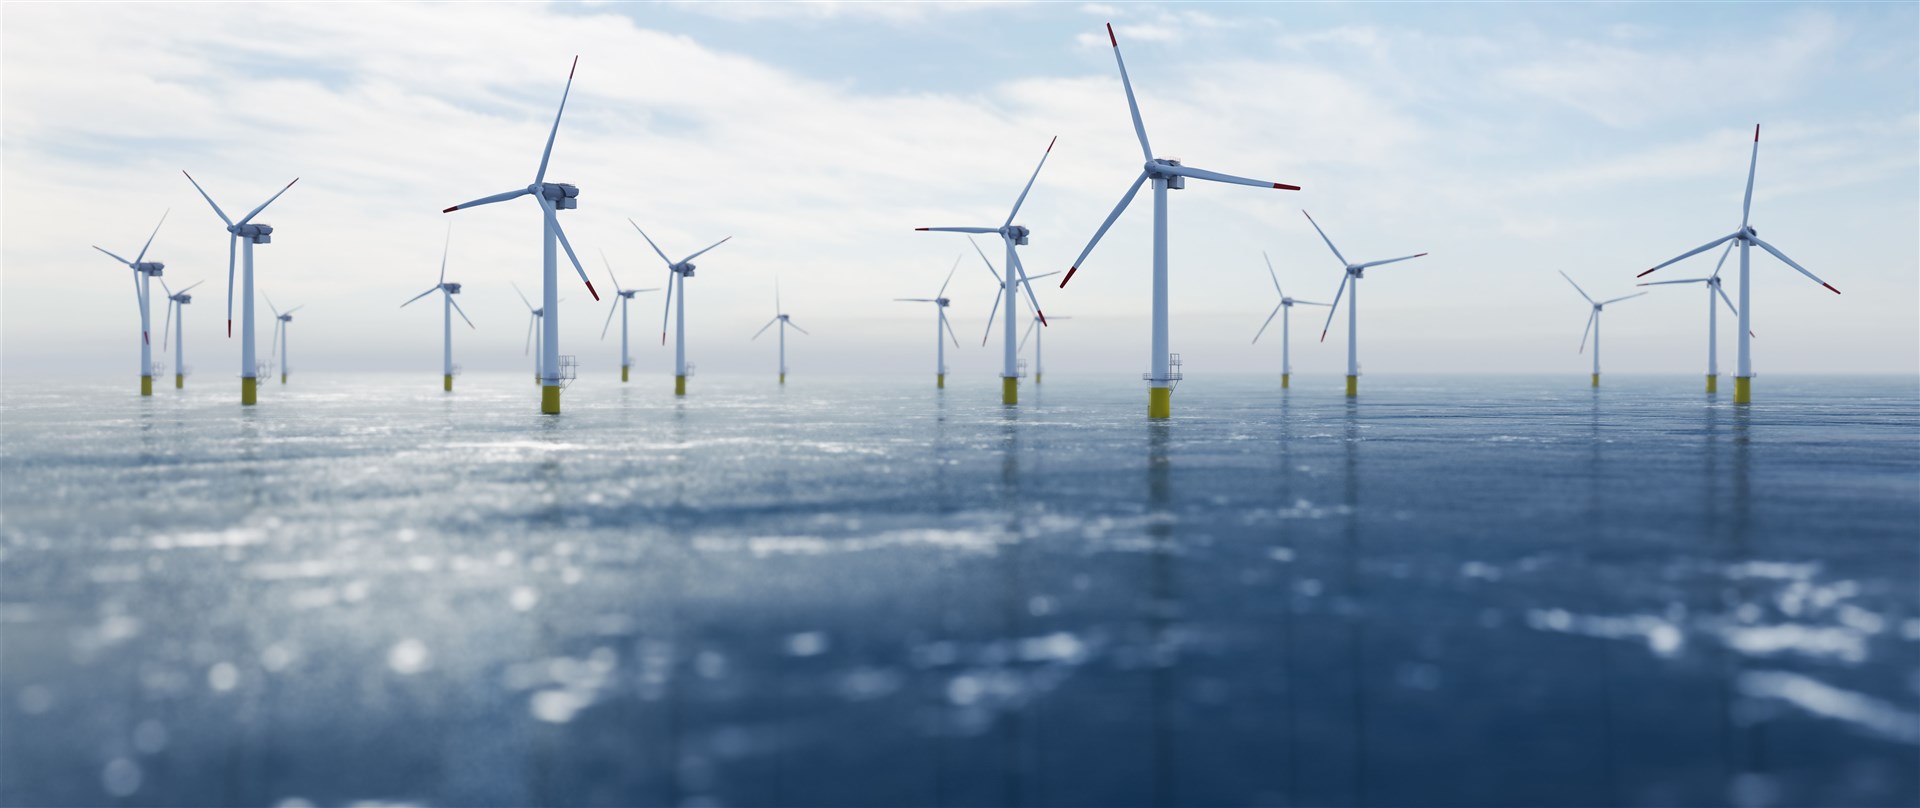 Offshore wind power and energy farm with many wind turbines on the ocean. Sustainable electricity production